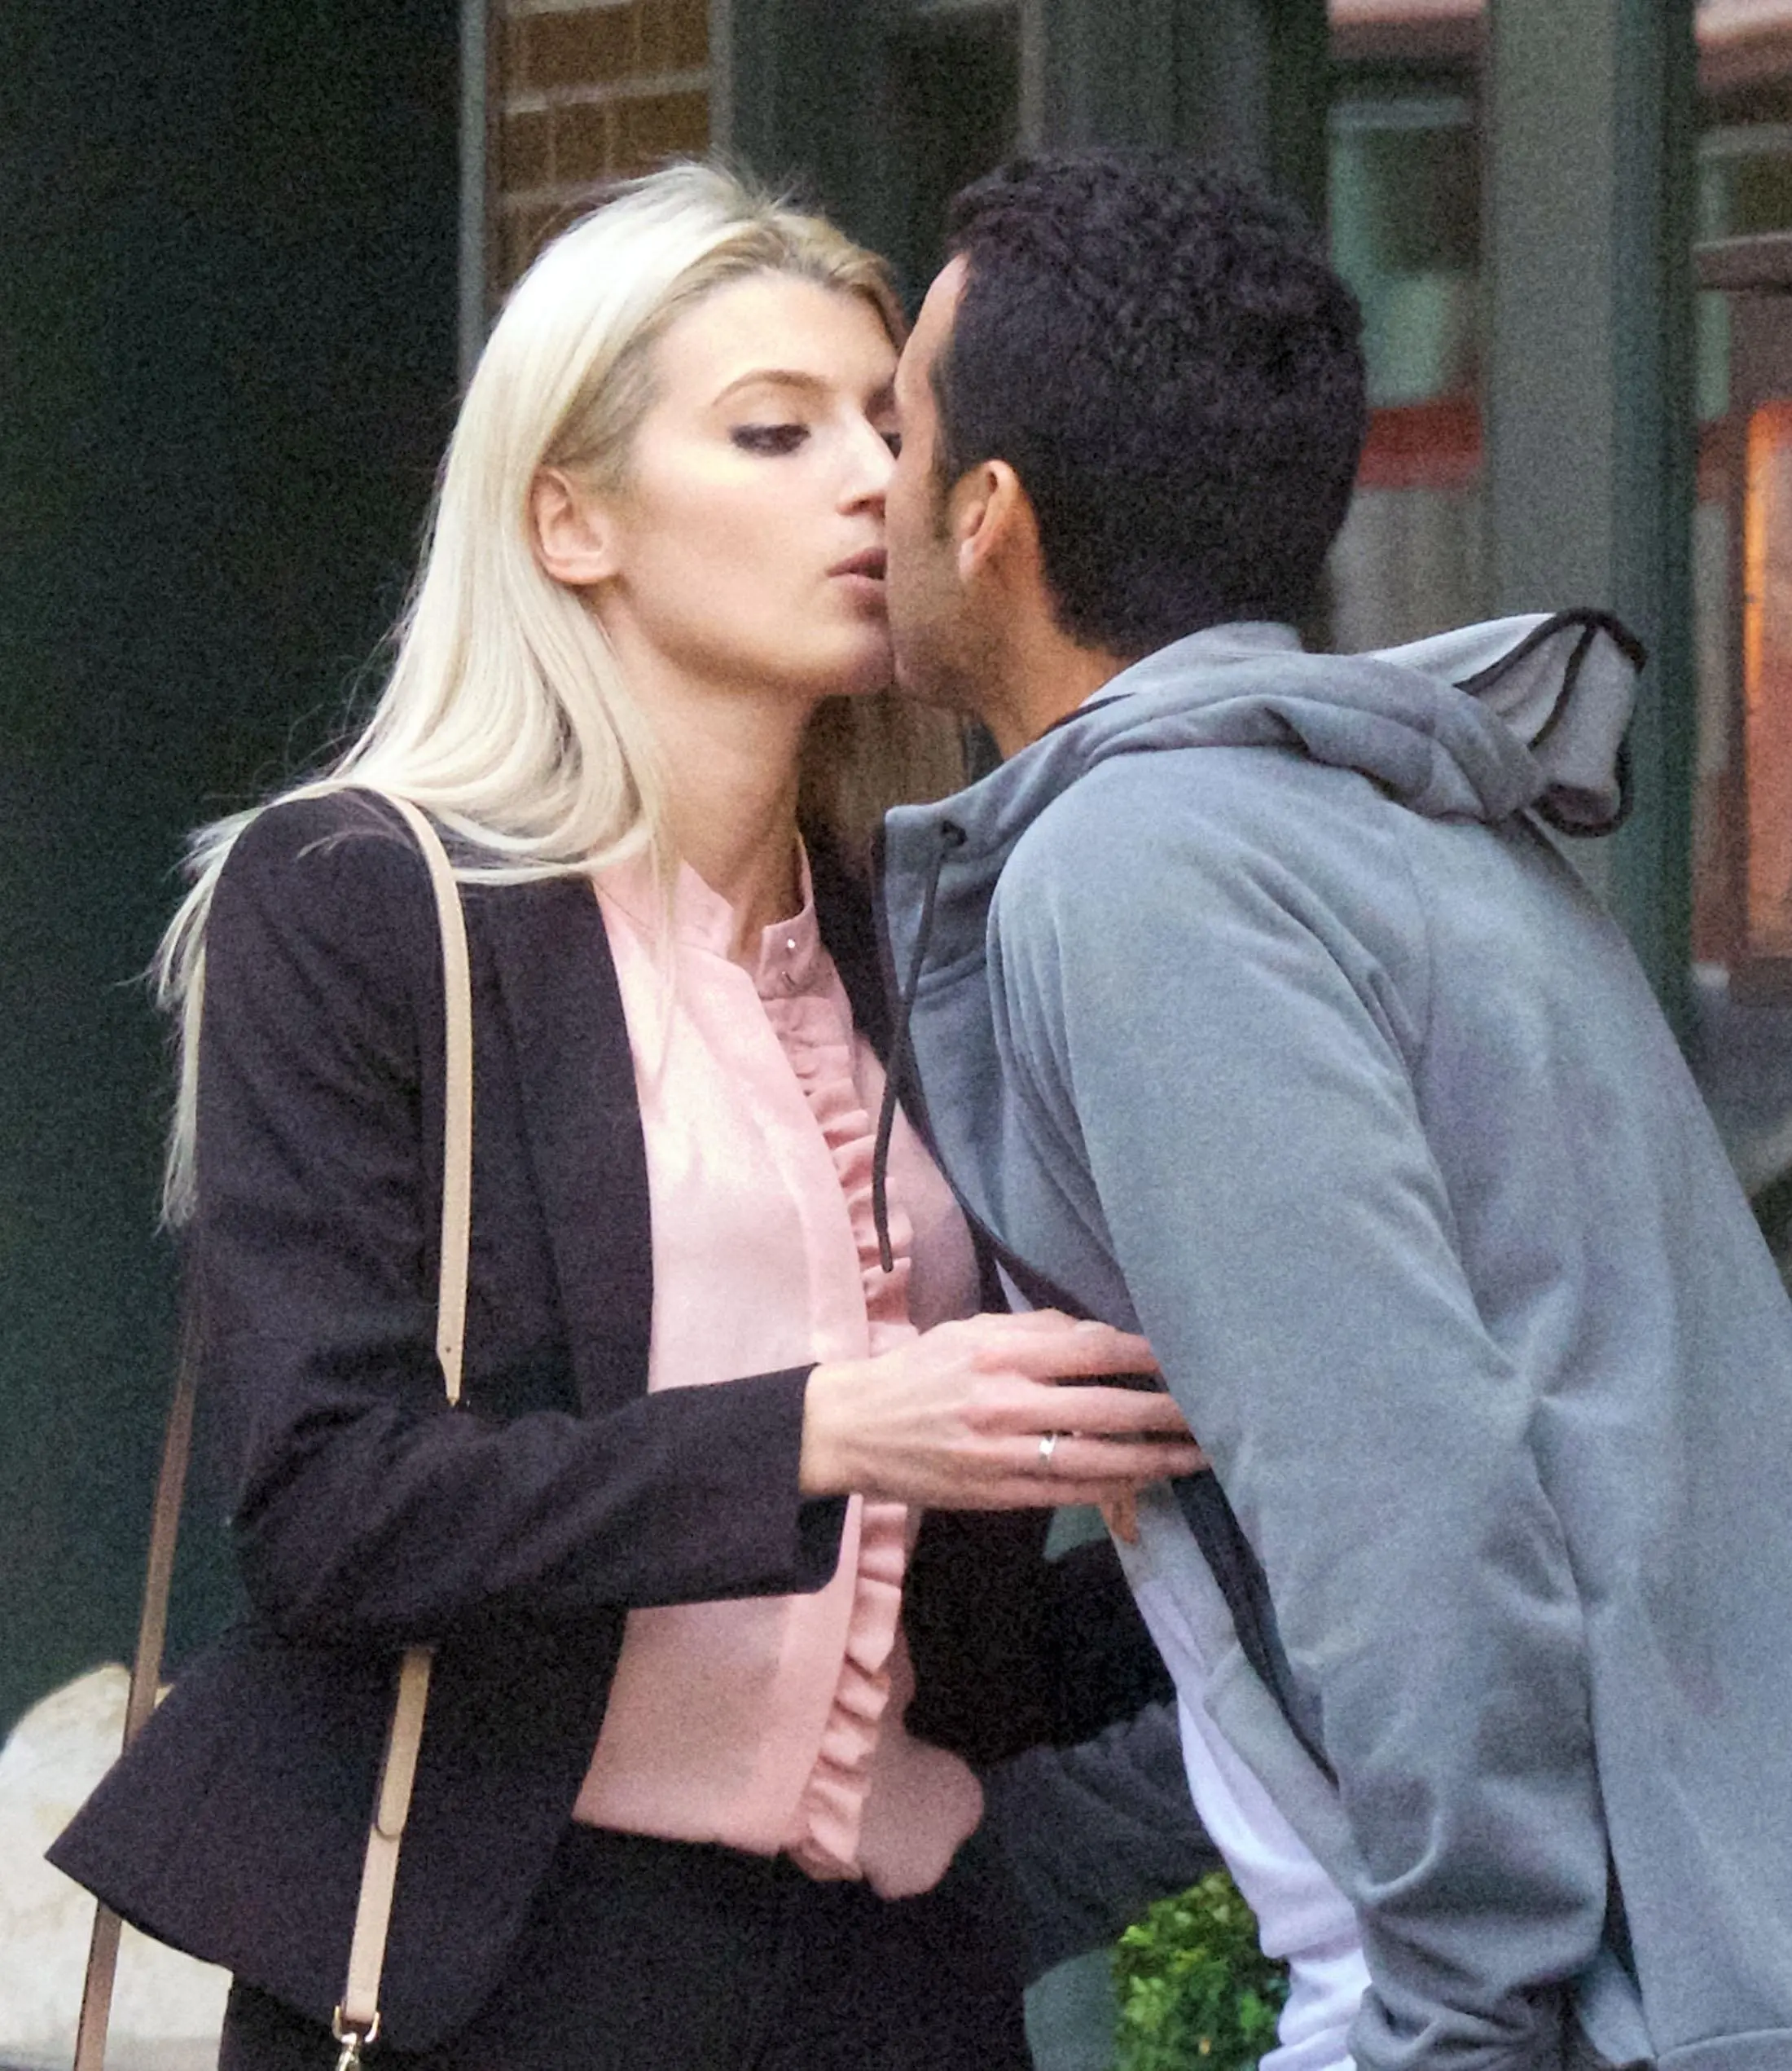 Pedro was first snapped kissing his girlfriend in September 2017. (Credit: BackGrid)